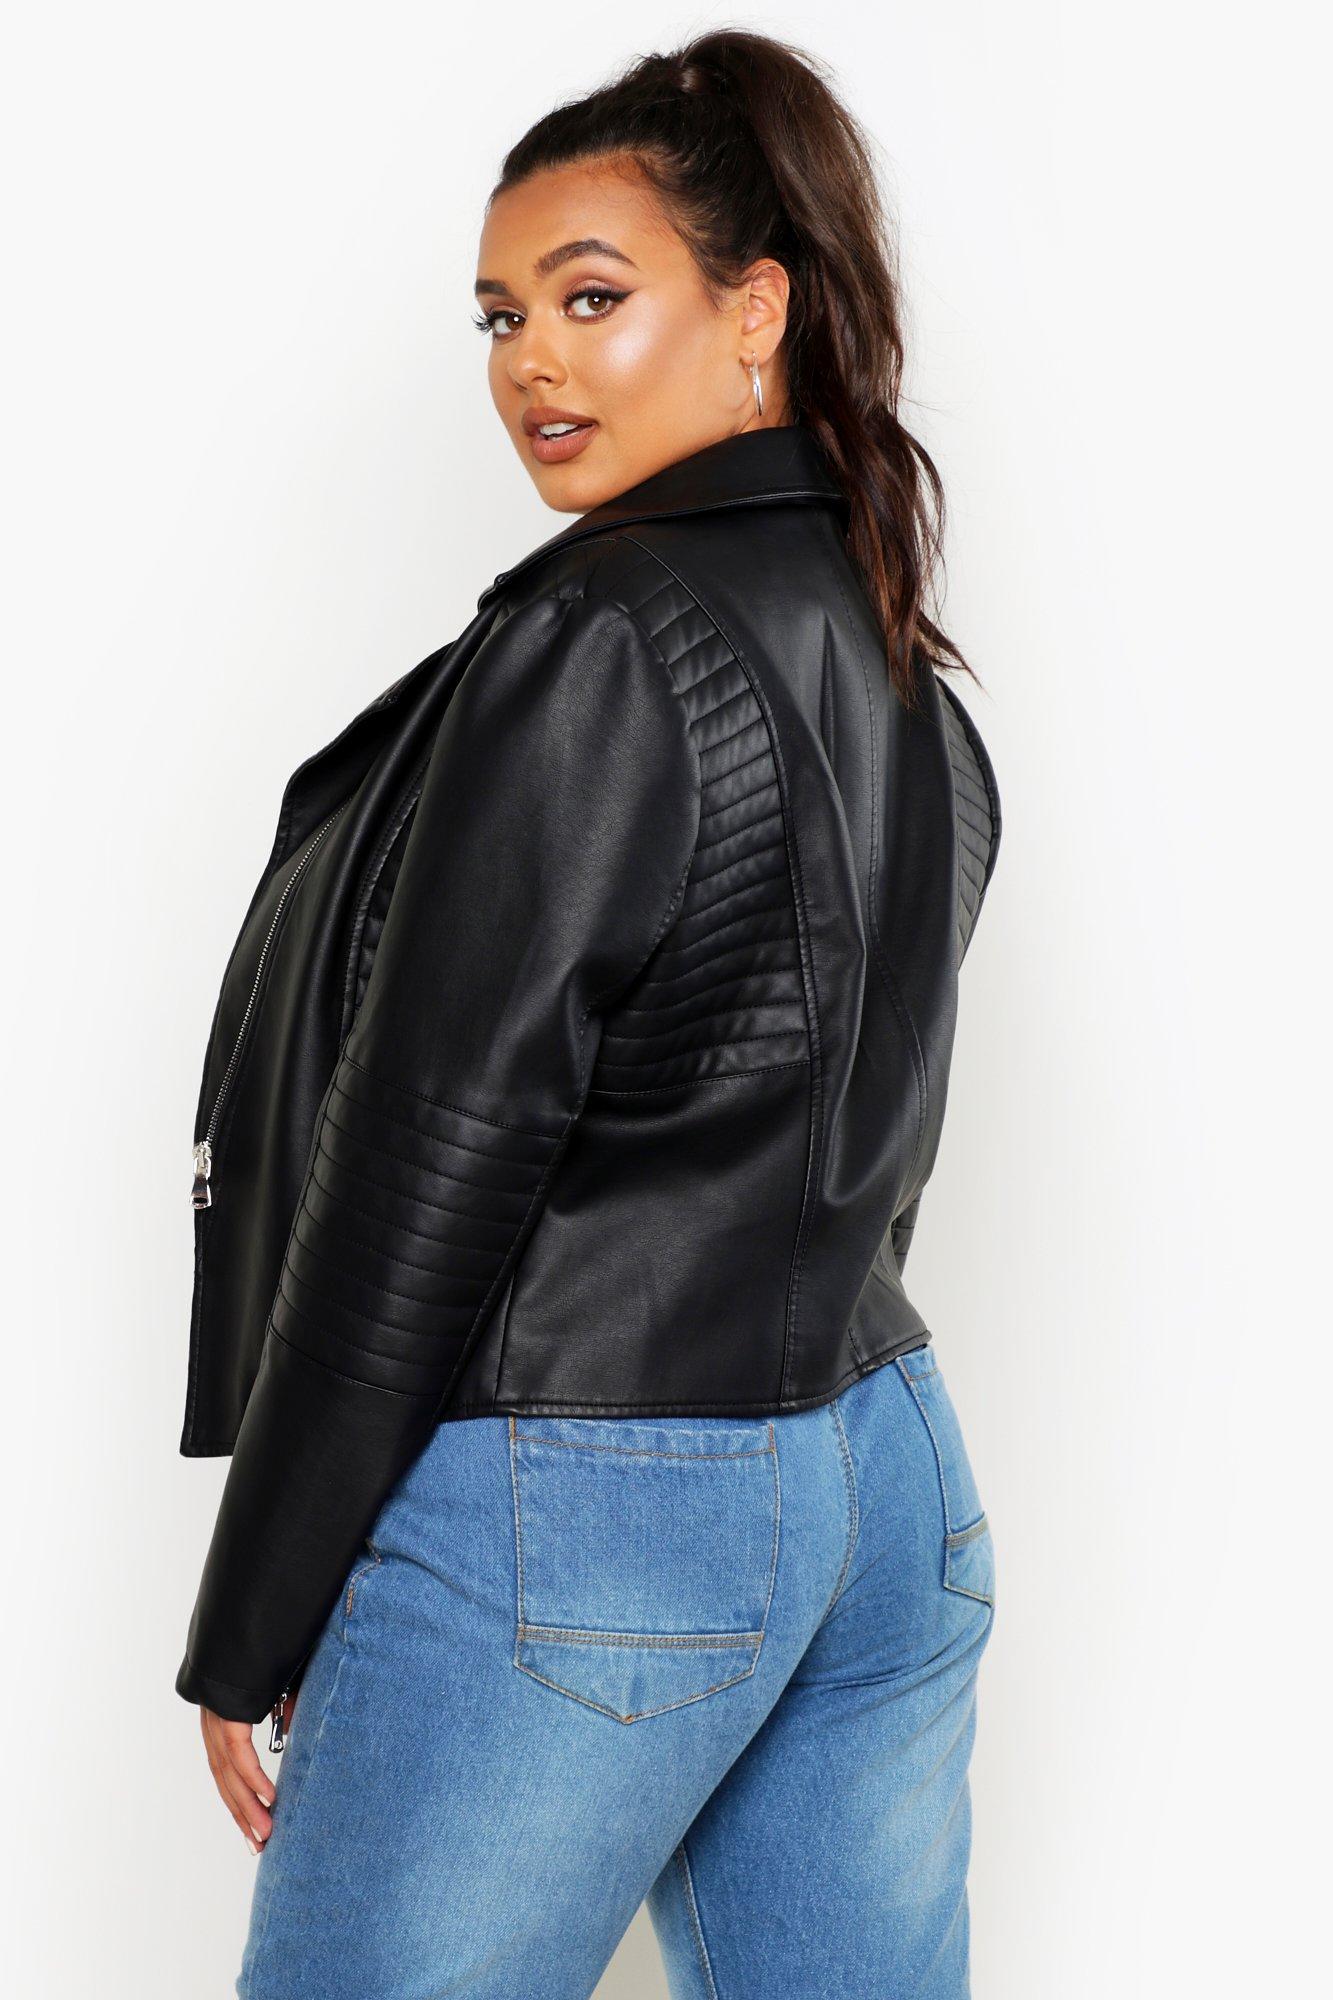 Boohoo Plus Faux Leather Quilted Moto Jacket in Black - Lyst